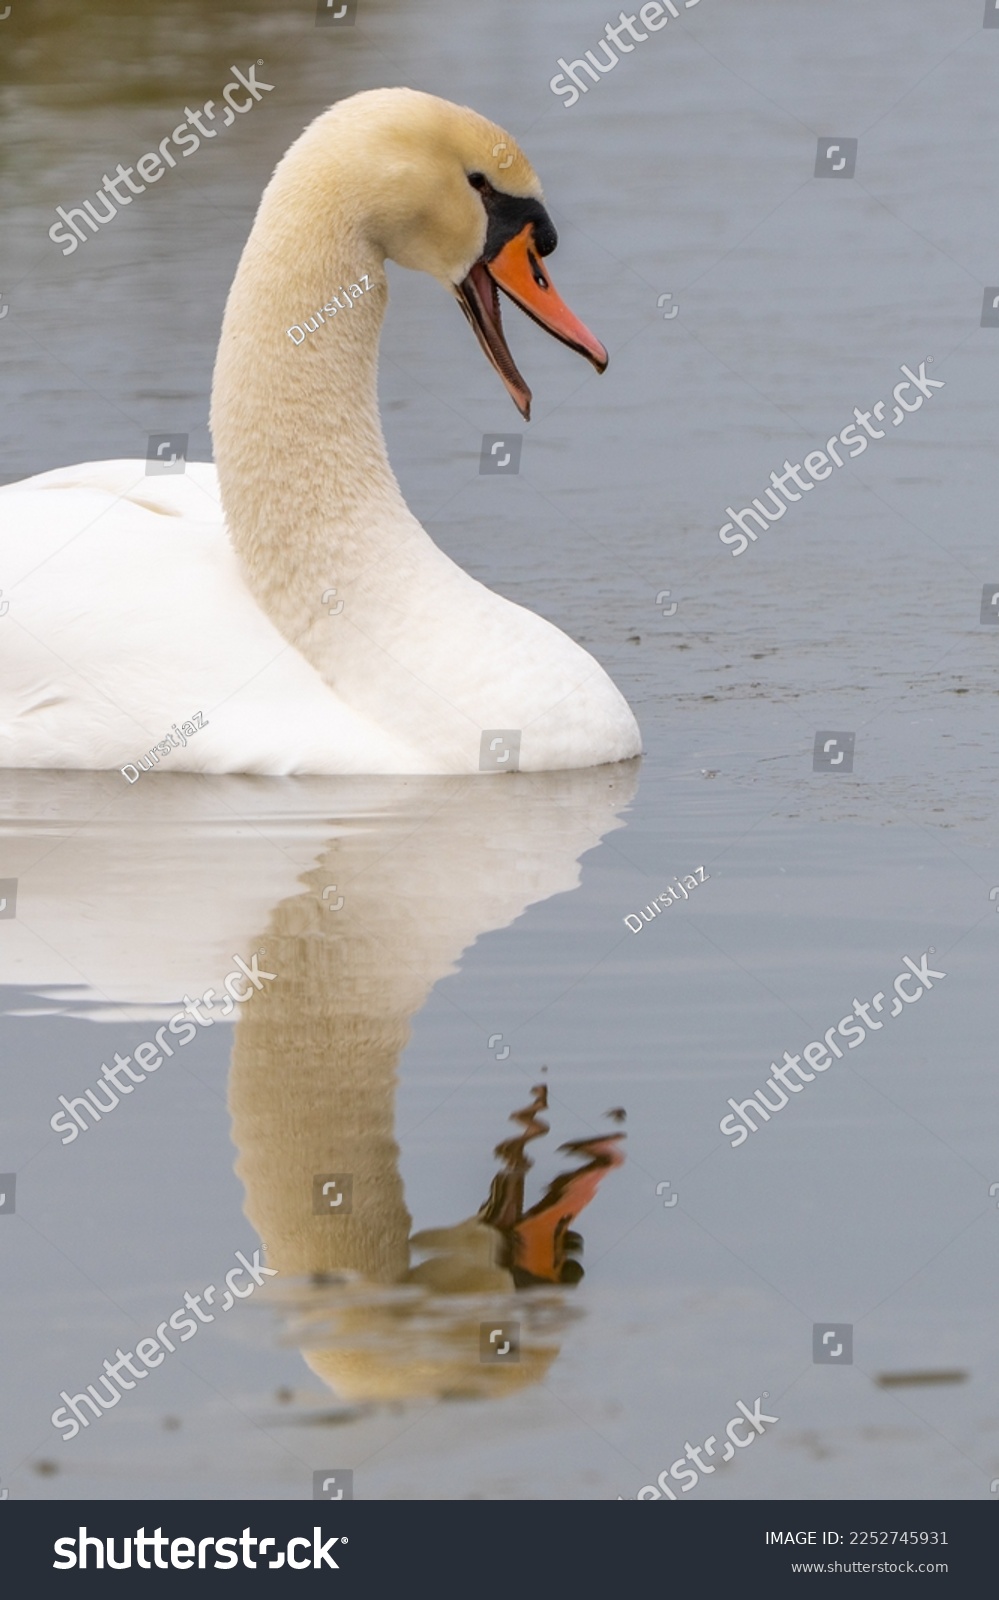 Mute swan, beak is open, vertical frame with its reflection in the water #2252745931